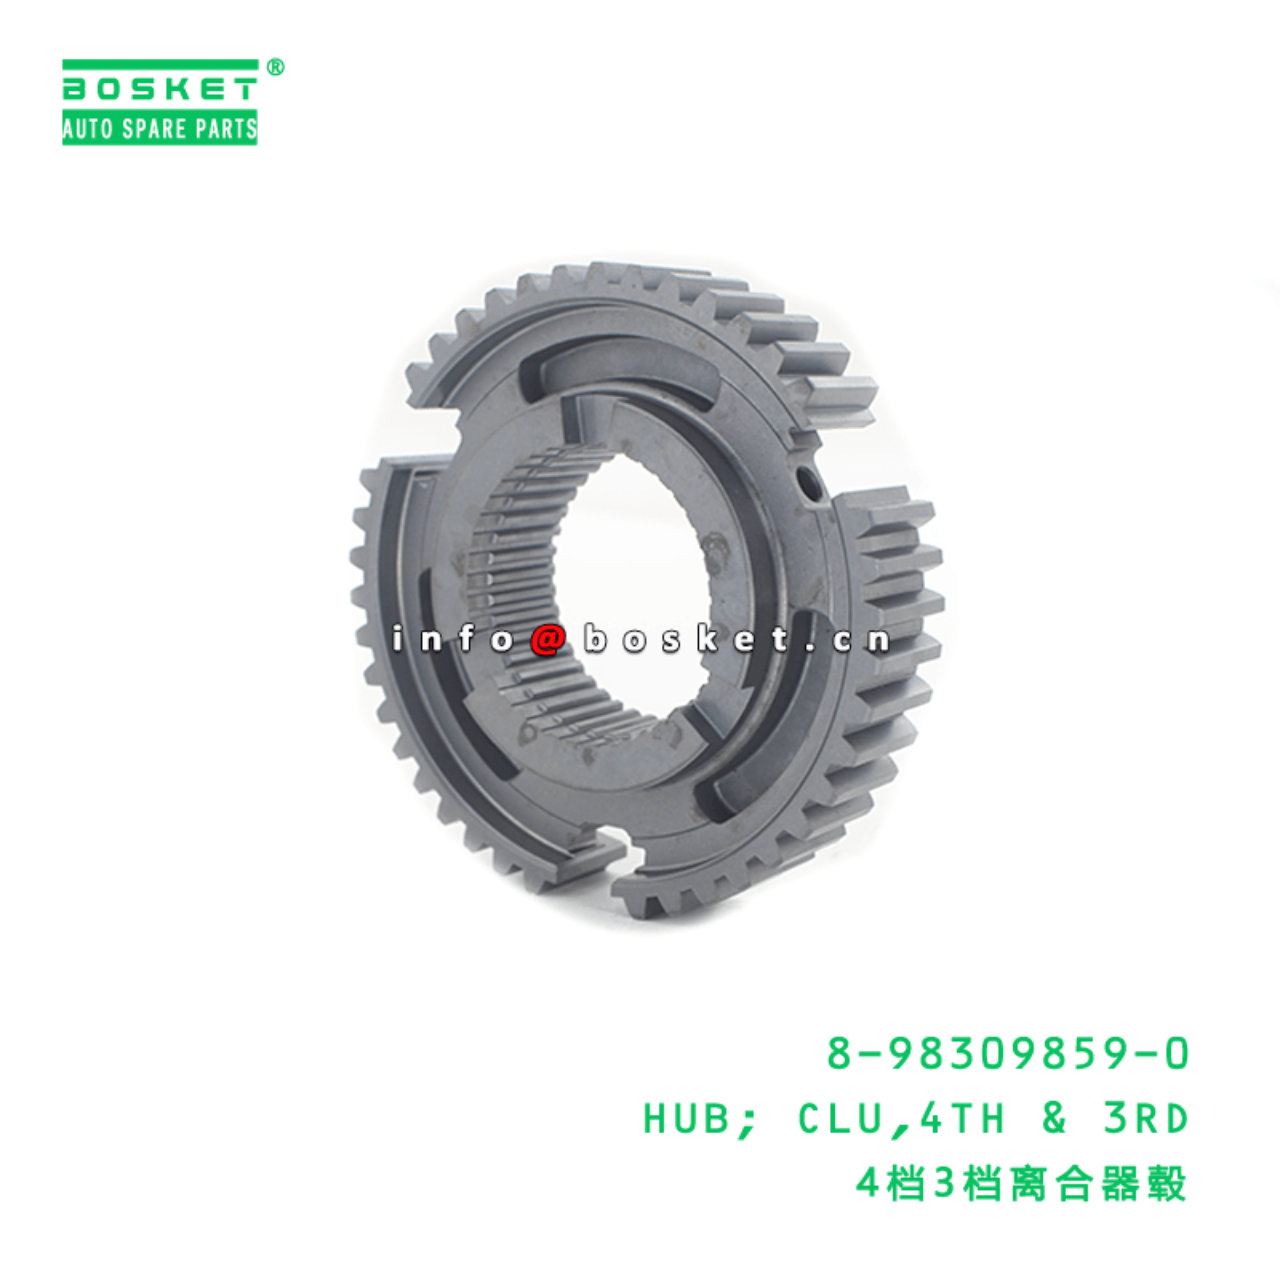 8-98309859-0 Fourth And Third Clutch Hub 8983098590 Suitable for ISUZU F Series Truck